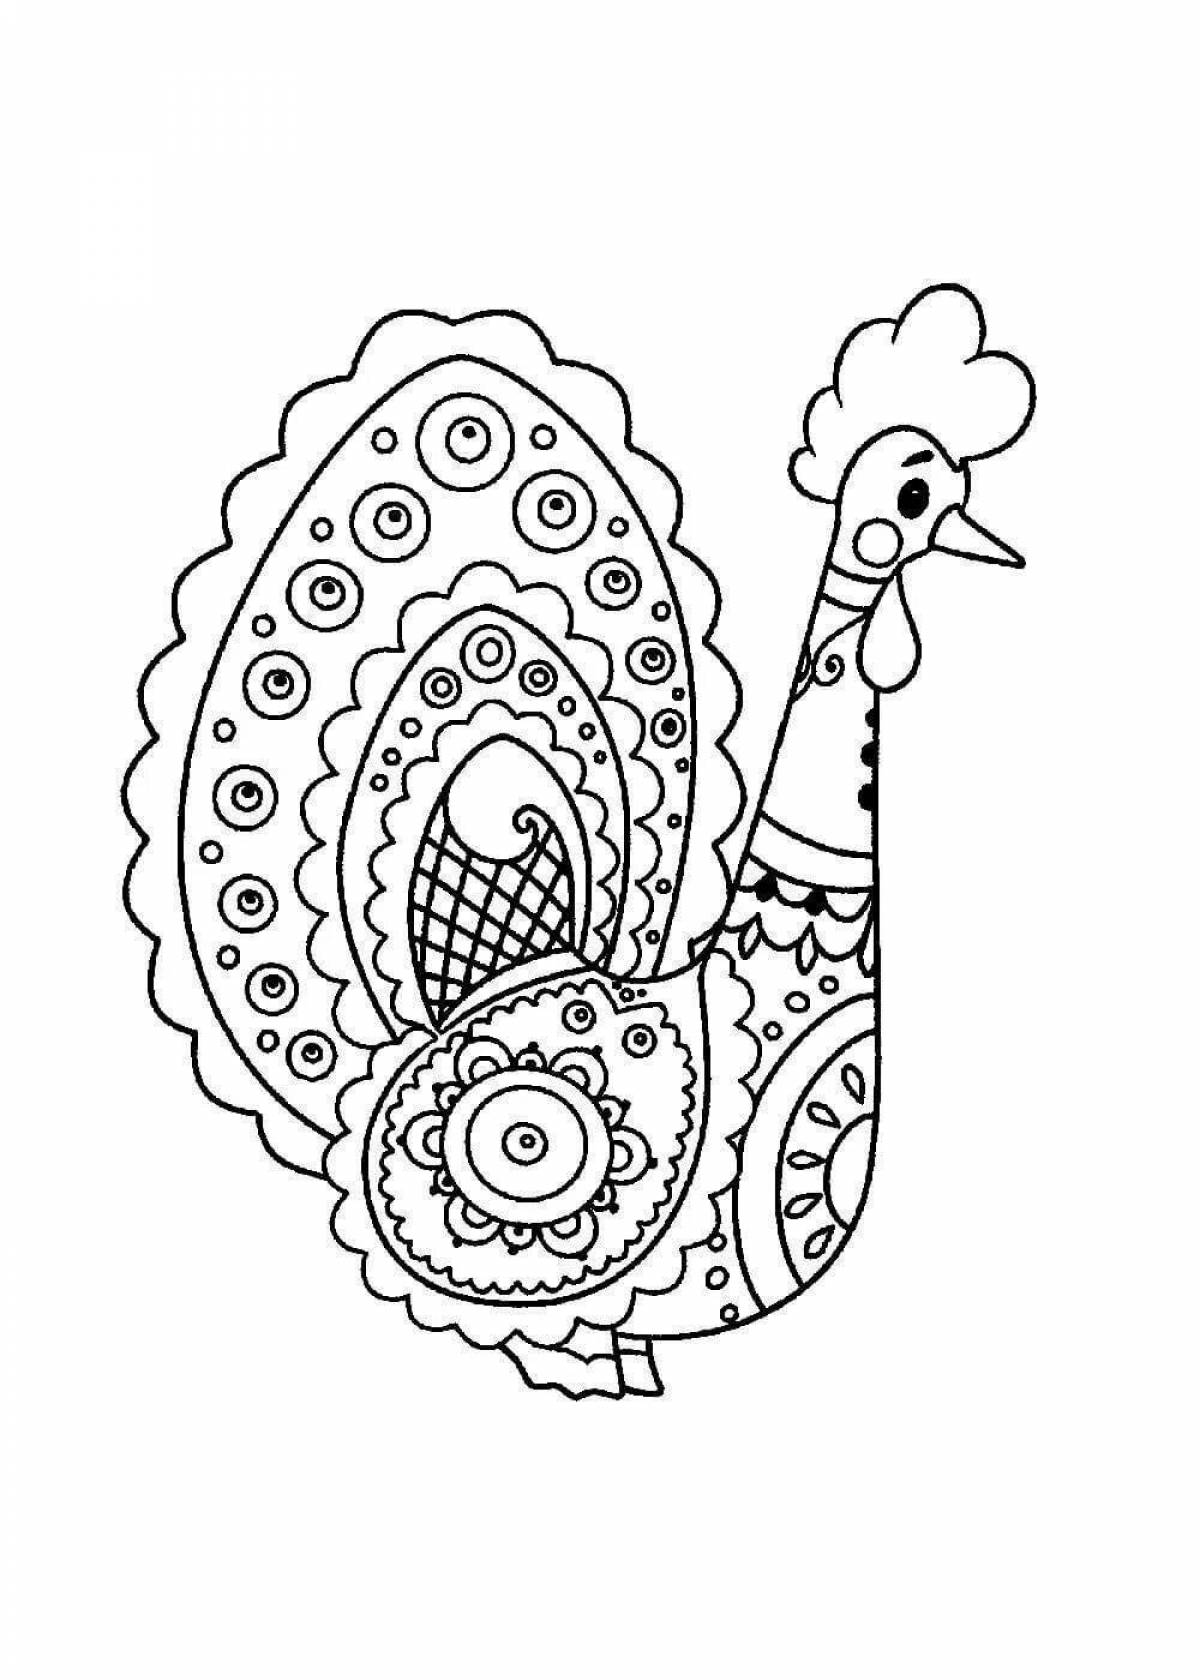 Bright Dymkovo turkey coloring pages for children